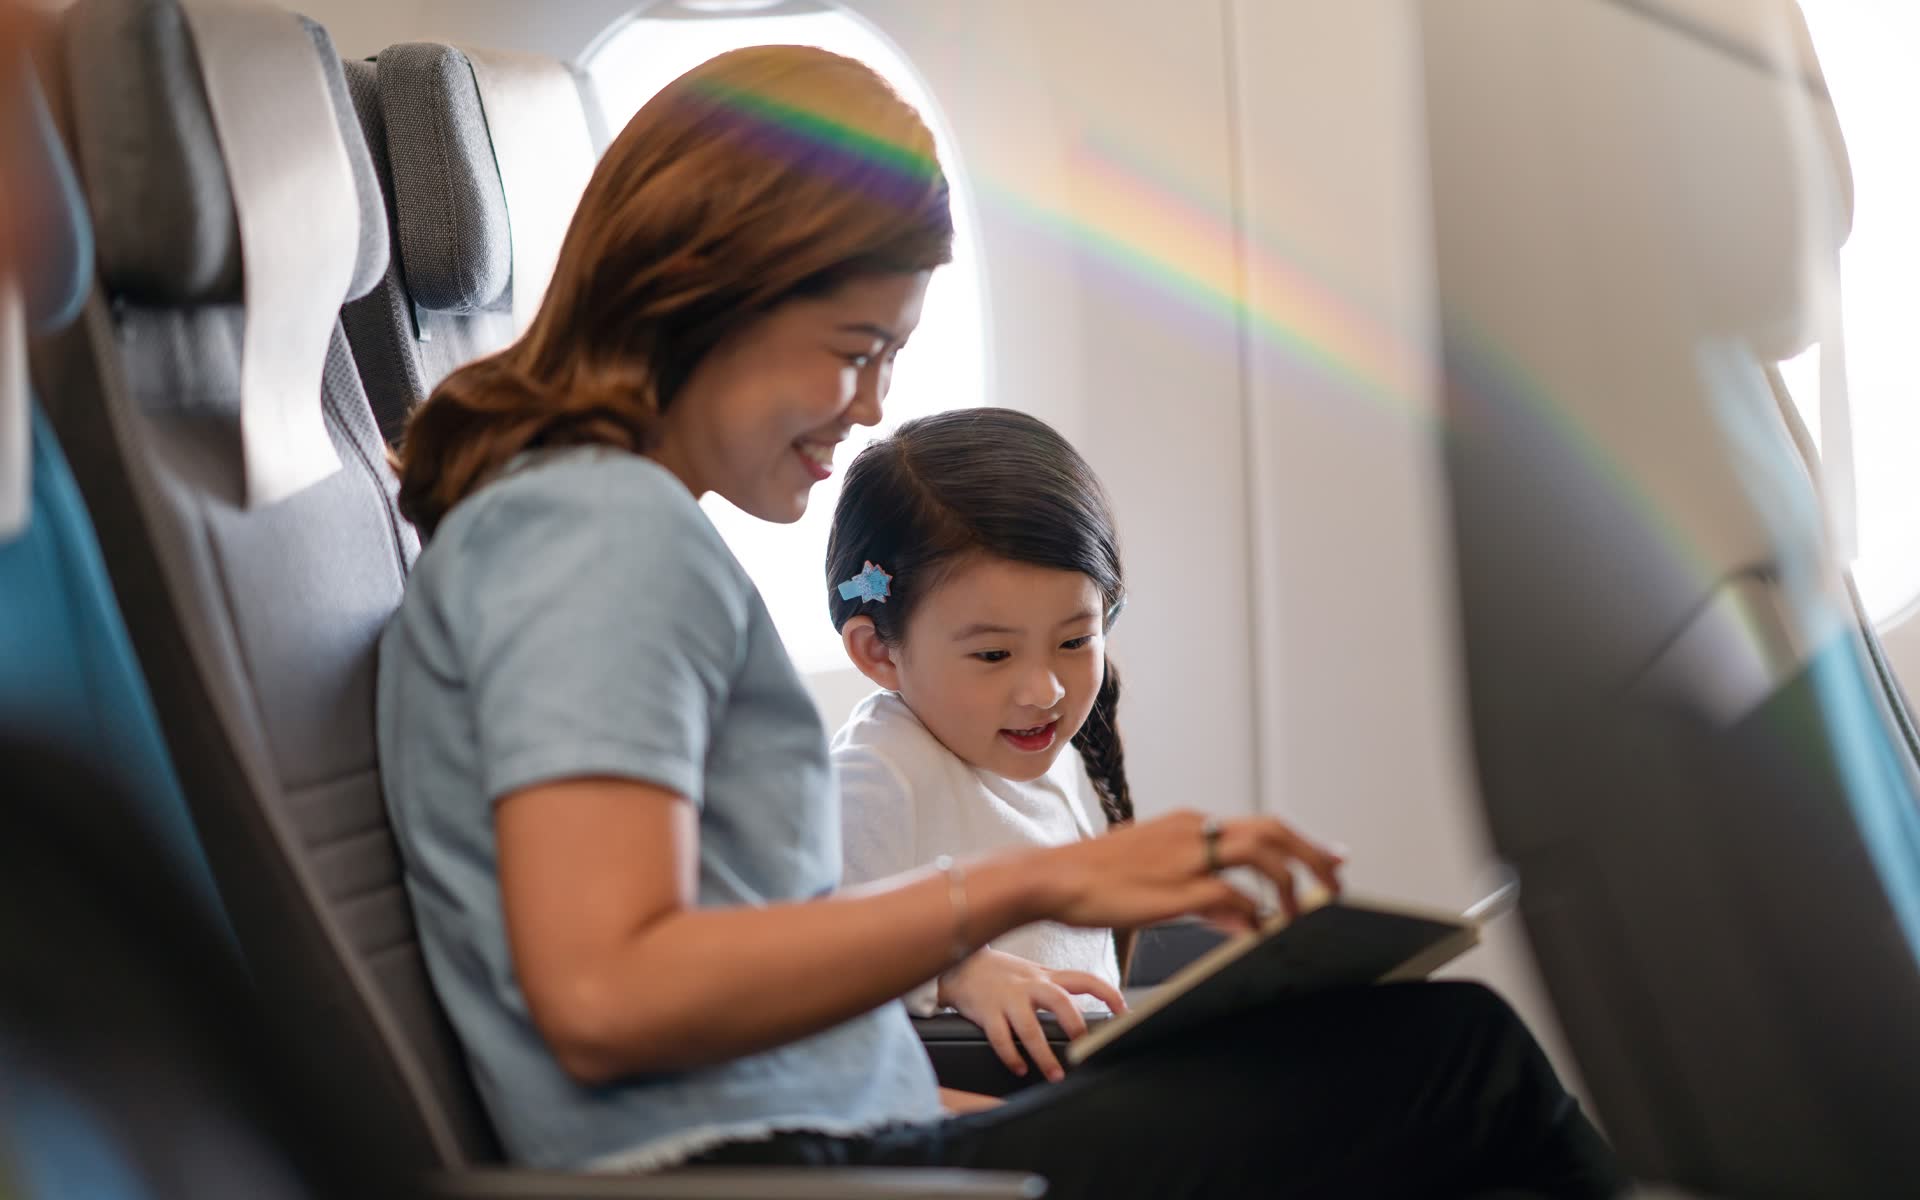 Singapore Airlines Gives Complimentary In-Flight Wi-Fi To Customers In All Cabin Classes